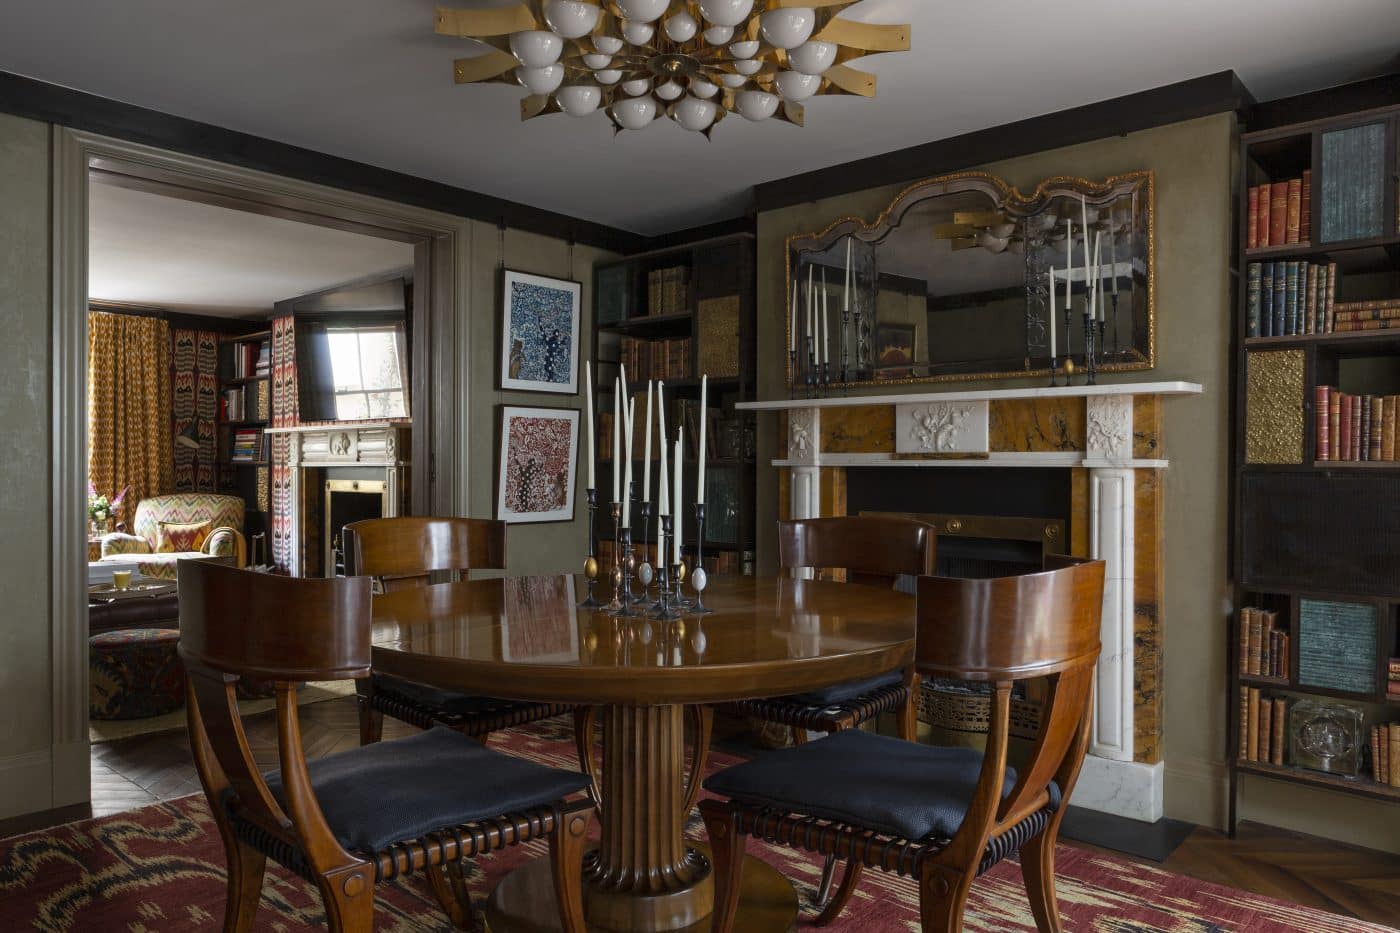 Dining room of townhouse in London's Knightsbridge designed by Bryan O'Sullivan with klismos chairs, Gio Ponti chandelier, Jamb mantel, T.H. Robsjohn-Gibbings table